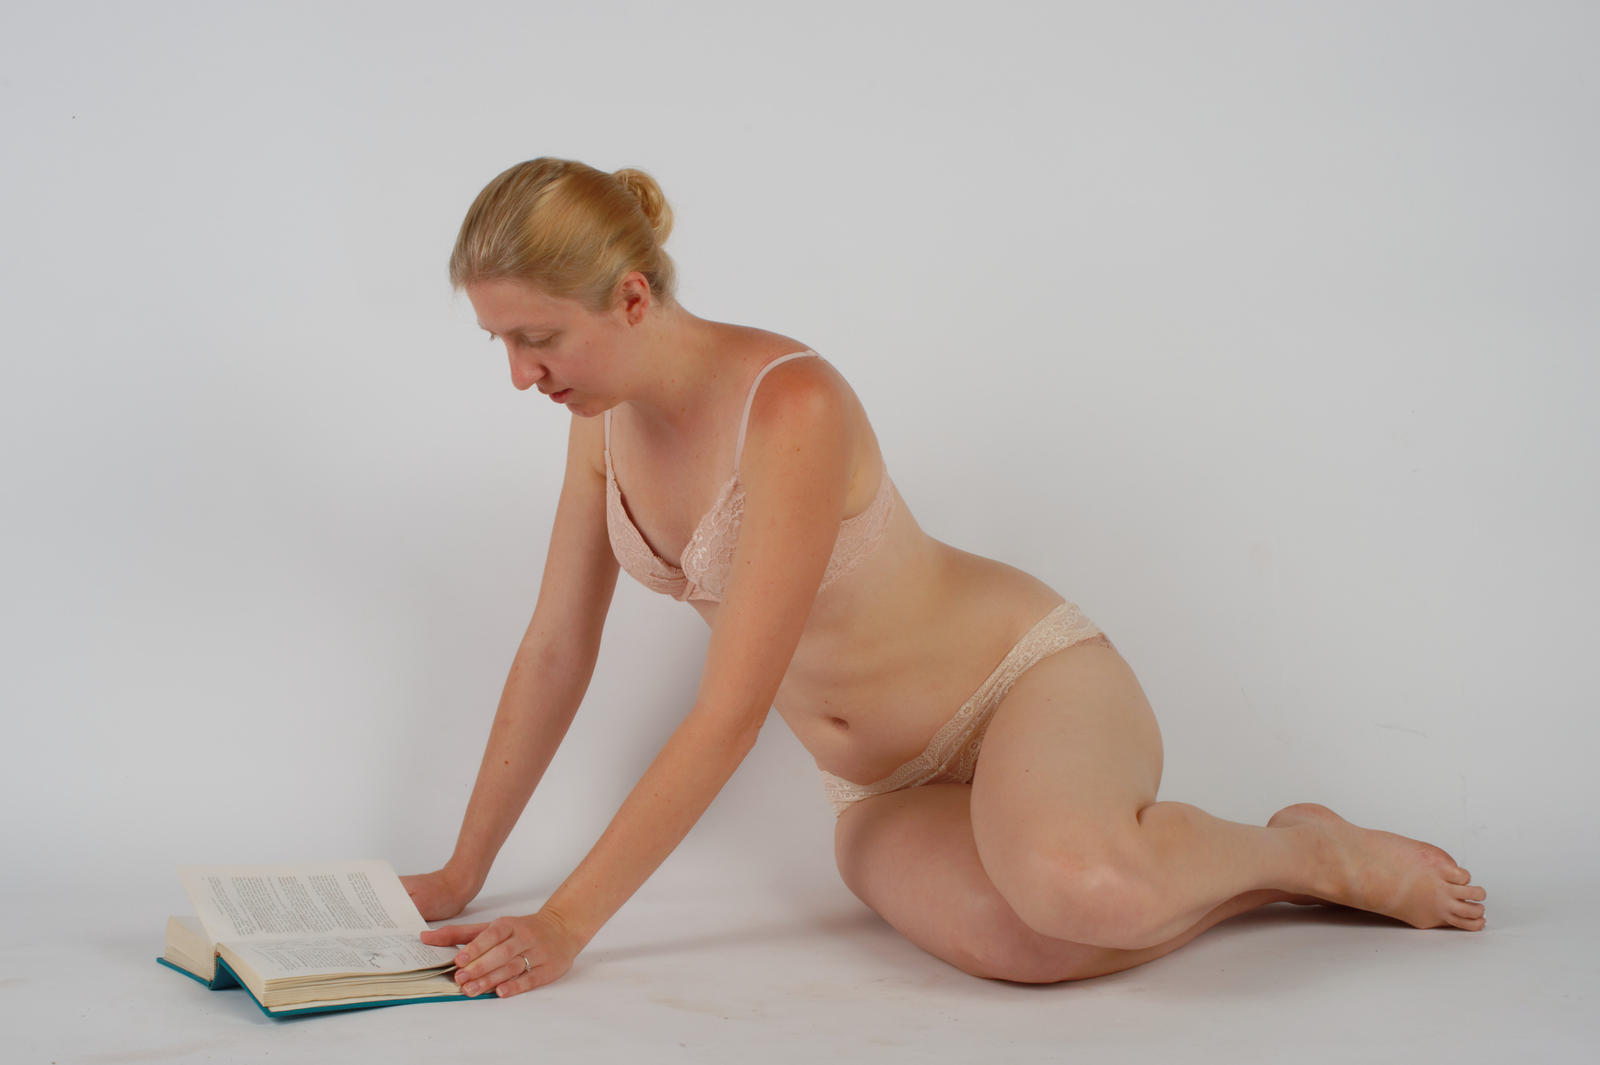 Body Reference - Propped up -  Book Open on Floor